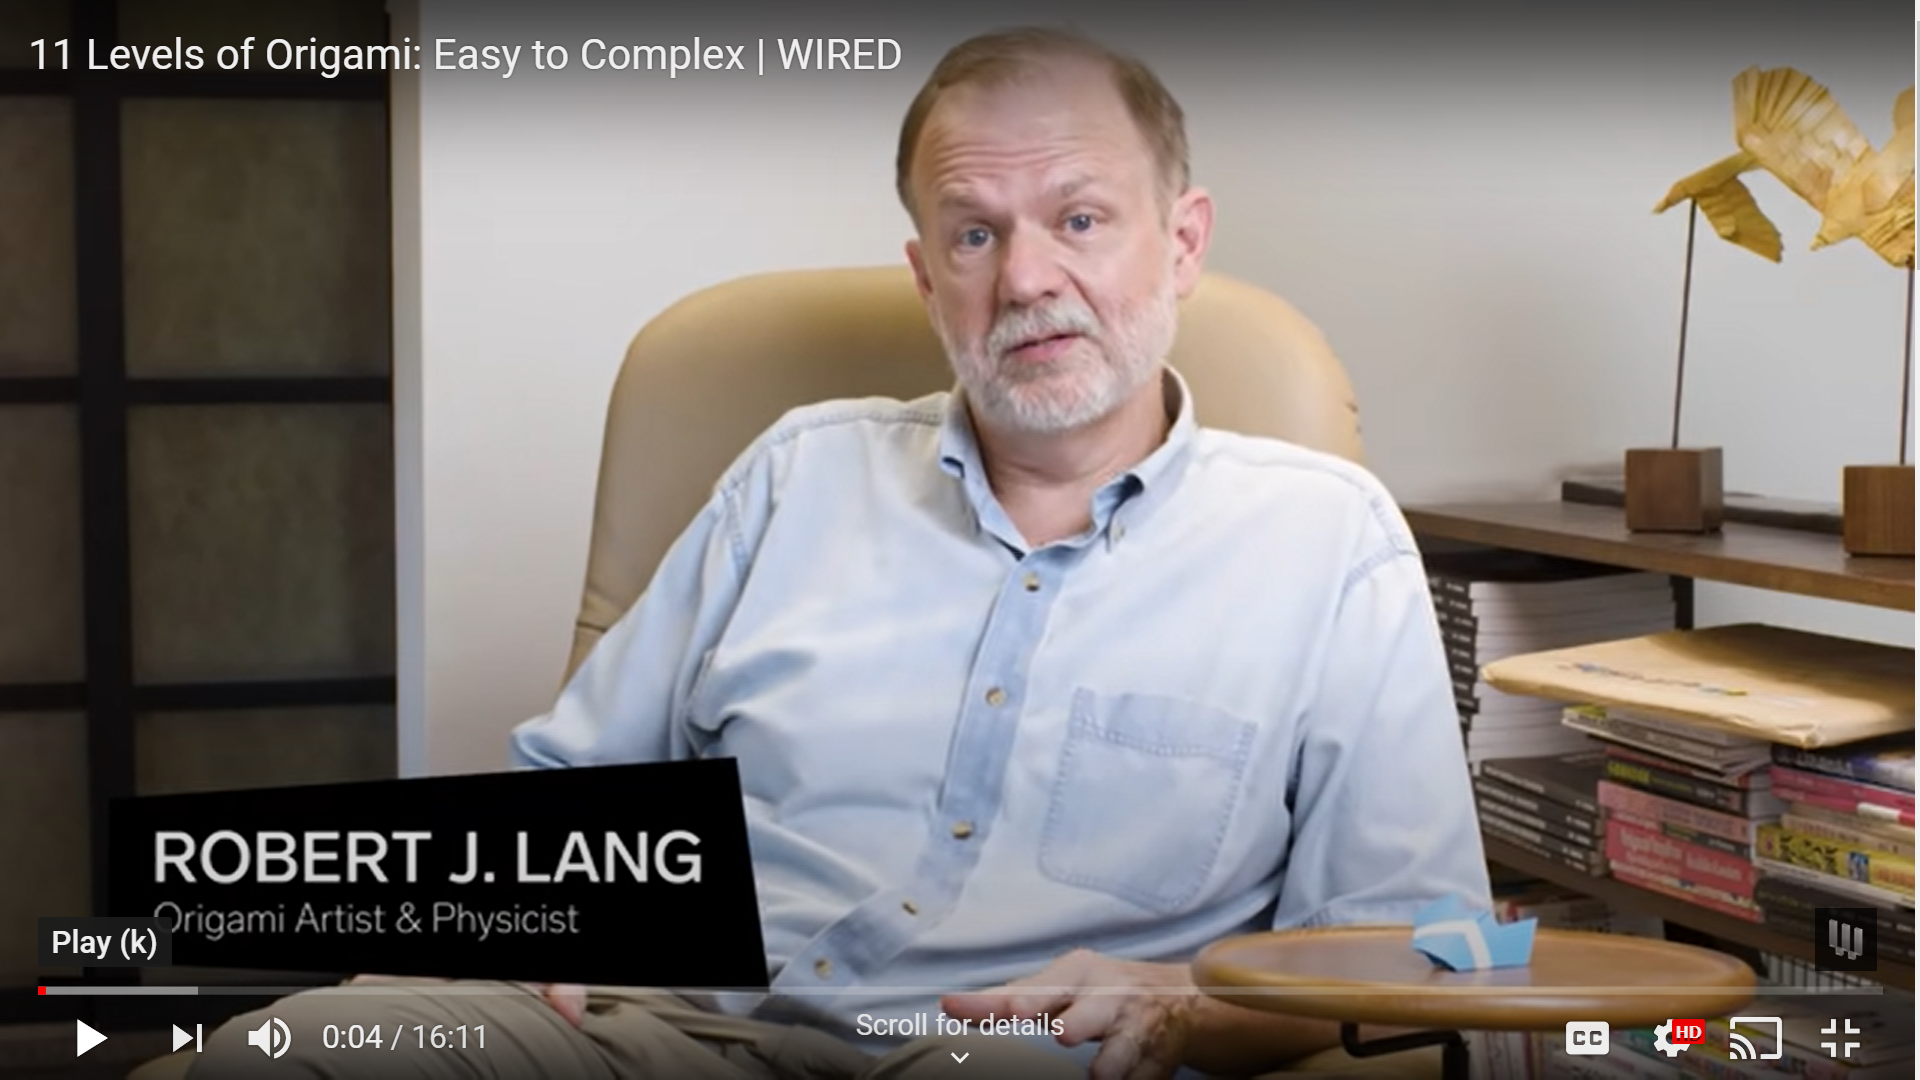 Screenshot of Robert Lang from Wired Magazine's video 11 Levels of Origami: Easy to Complex